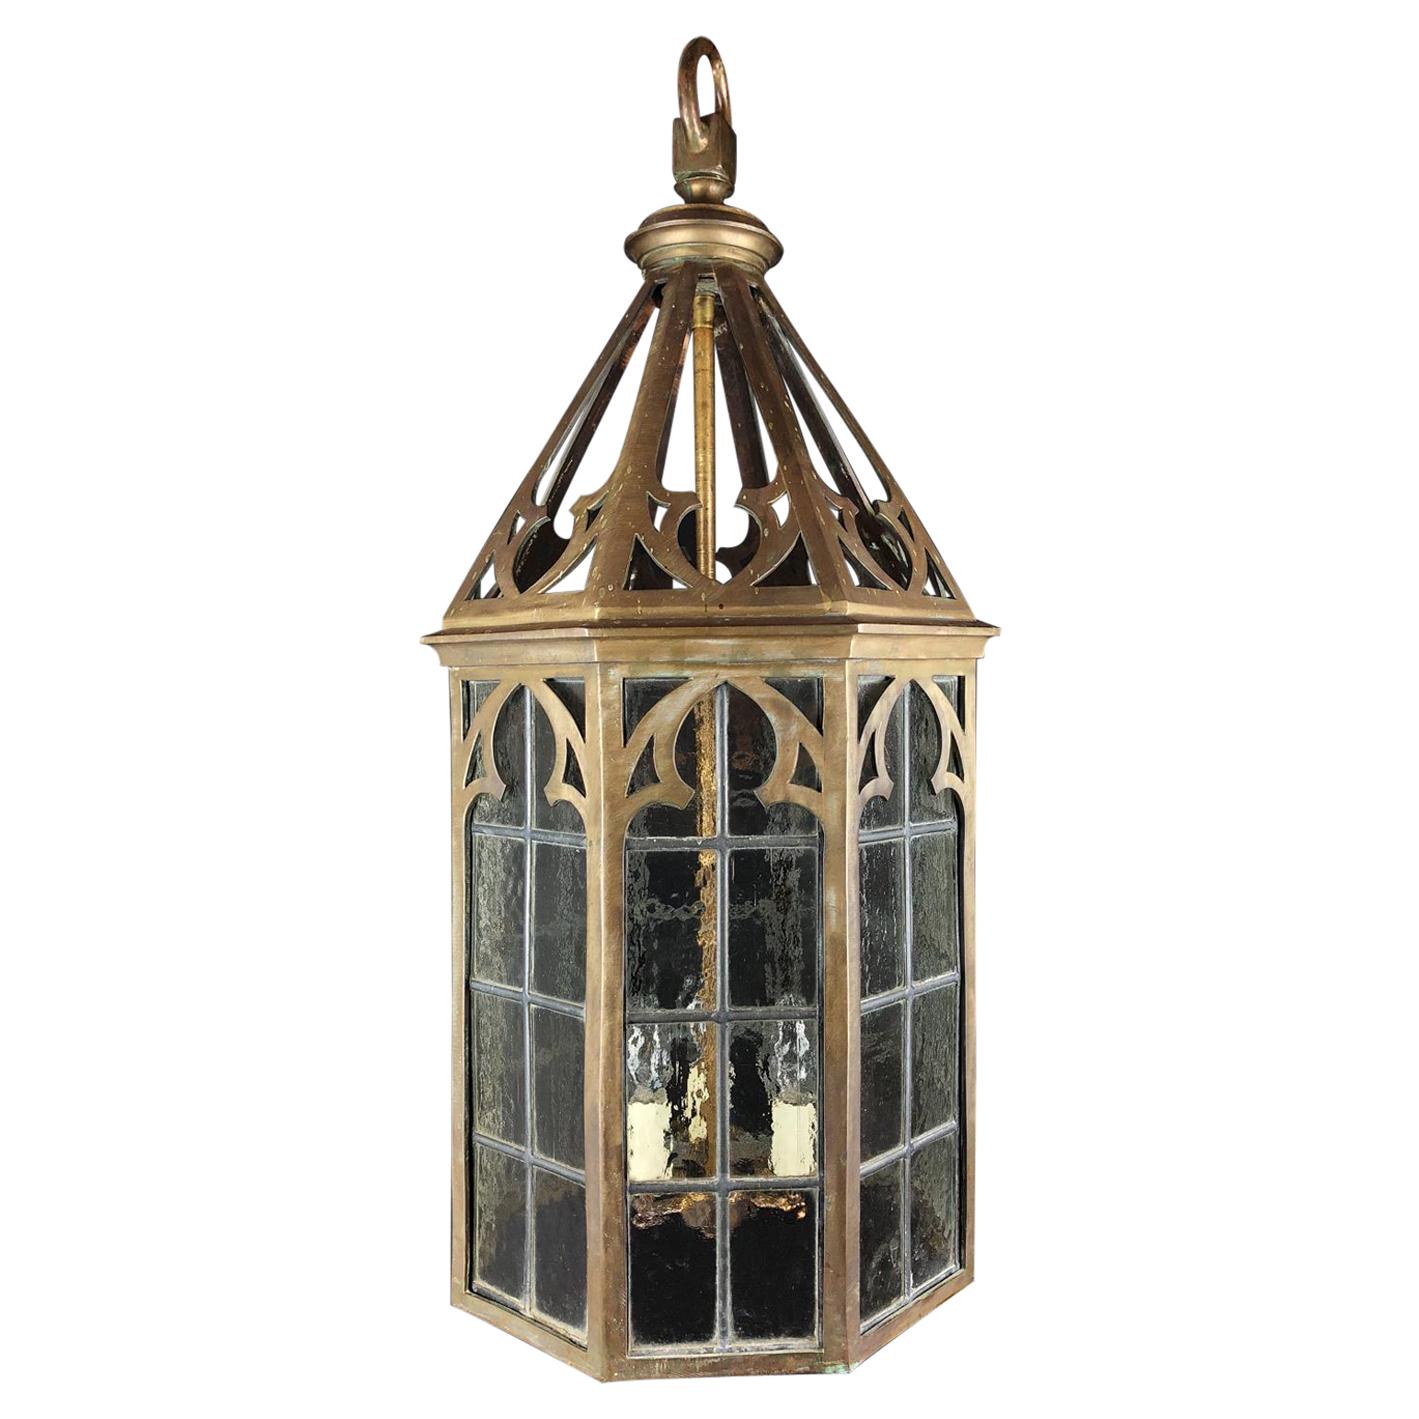 Neogothic Brass Hall Lantern, Late 19th Century Gothic Style, with Lead Lattice